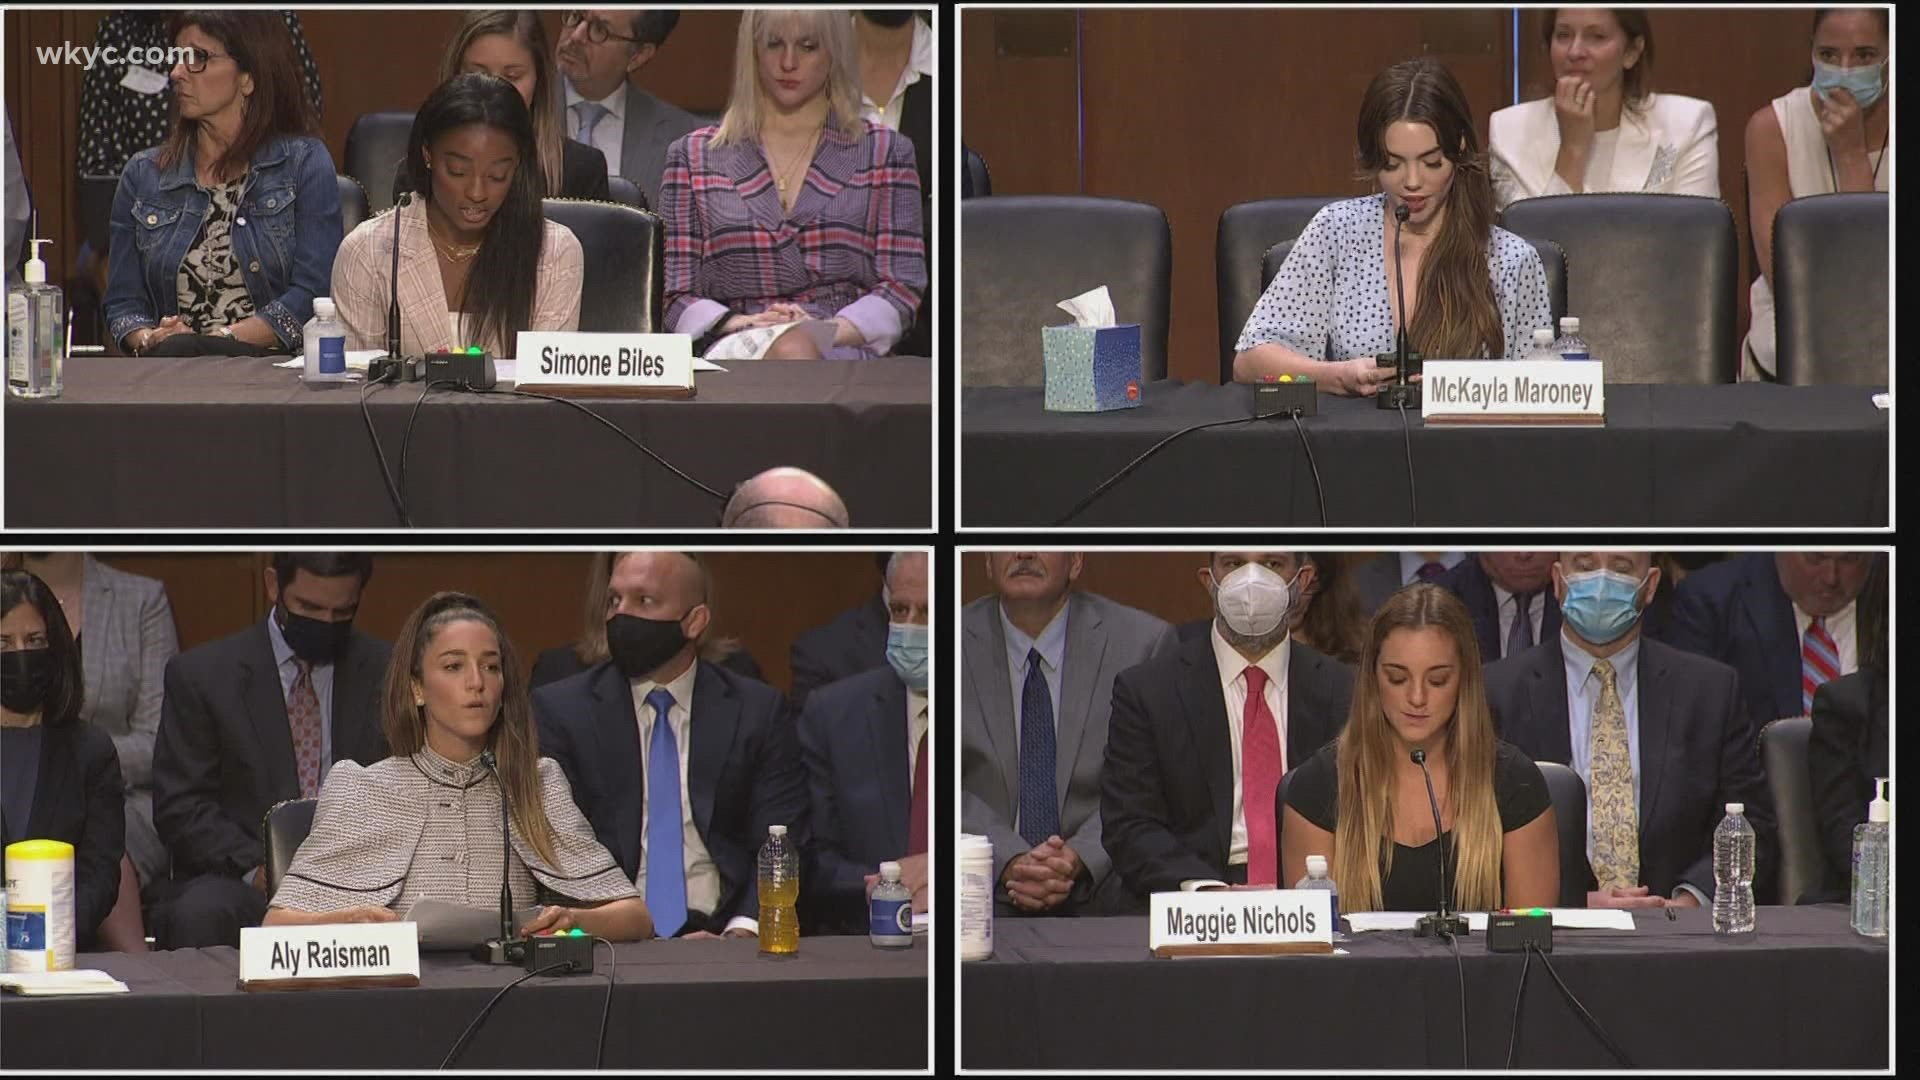 Simone Biles, McKayla Maroney, Maggie Nichols, and Aly Raisman testified Wednesday about the mishandling of the Larry Nassar case. Hear what they had to say.